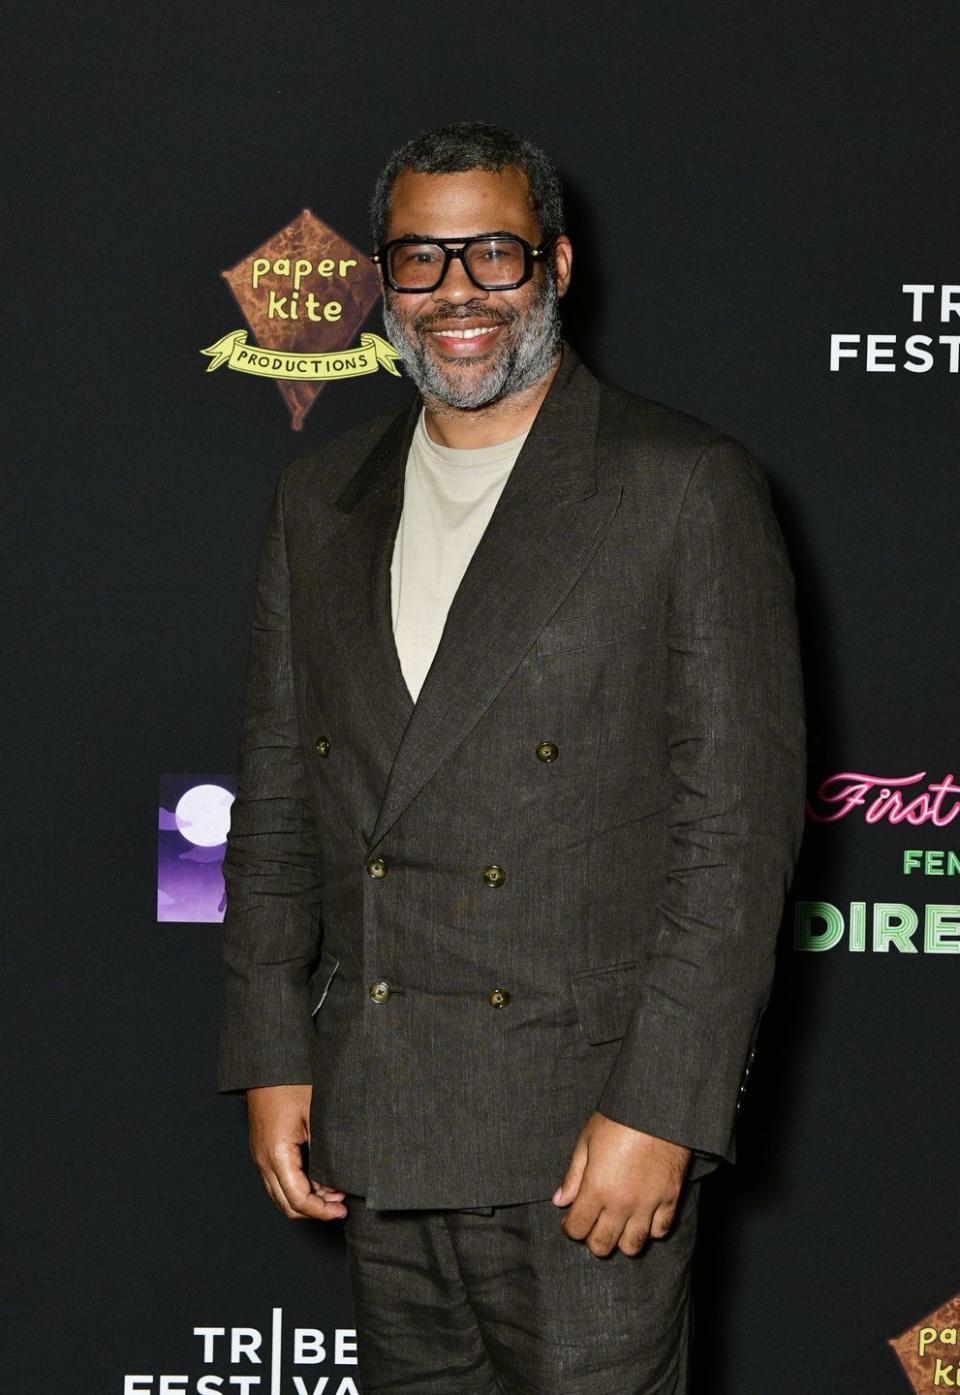 jordan peele, a man with black and grey hair and a black and grey beard, wearing black framed glasses, a tan shirt, and dark blazer while smiling for the camera